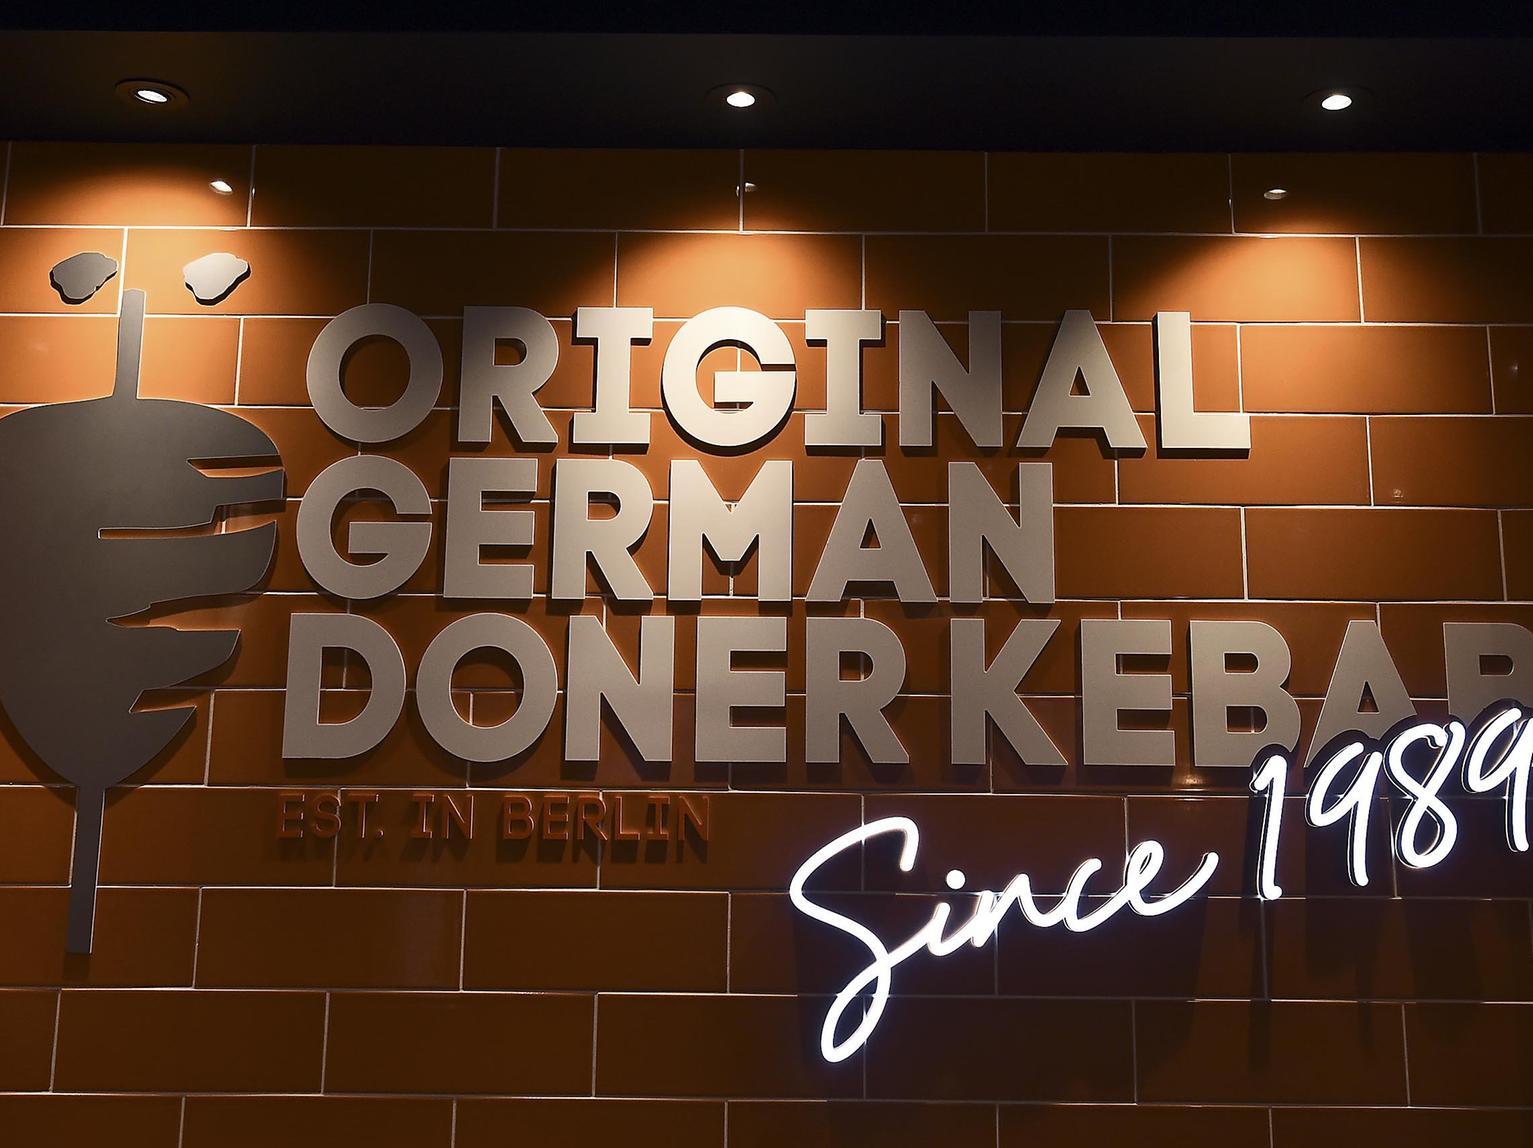 First opened in Berlin in 1989, the kebab joint has gone from strength to strength and now has over 70 restaurants across the world.